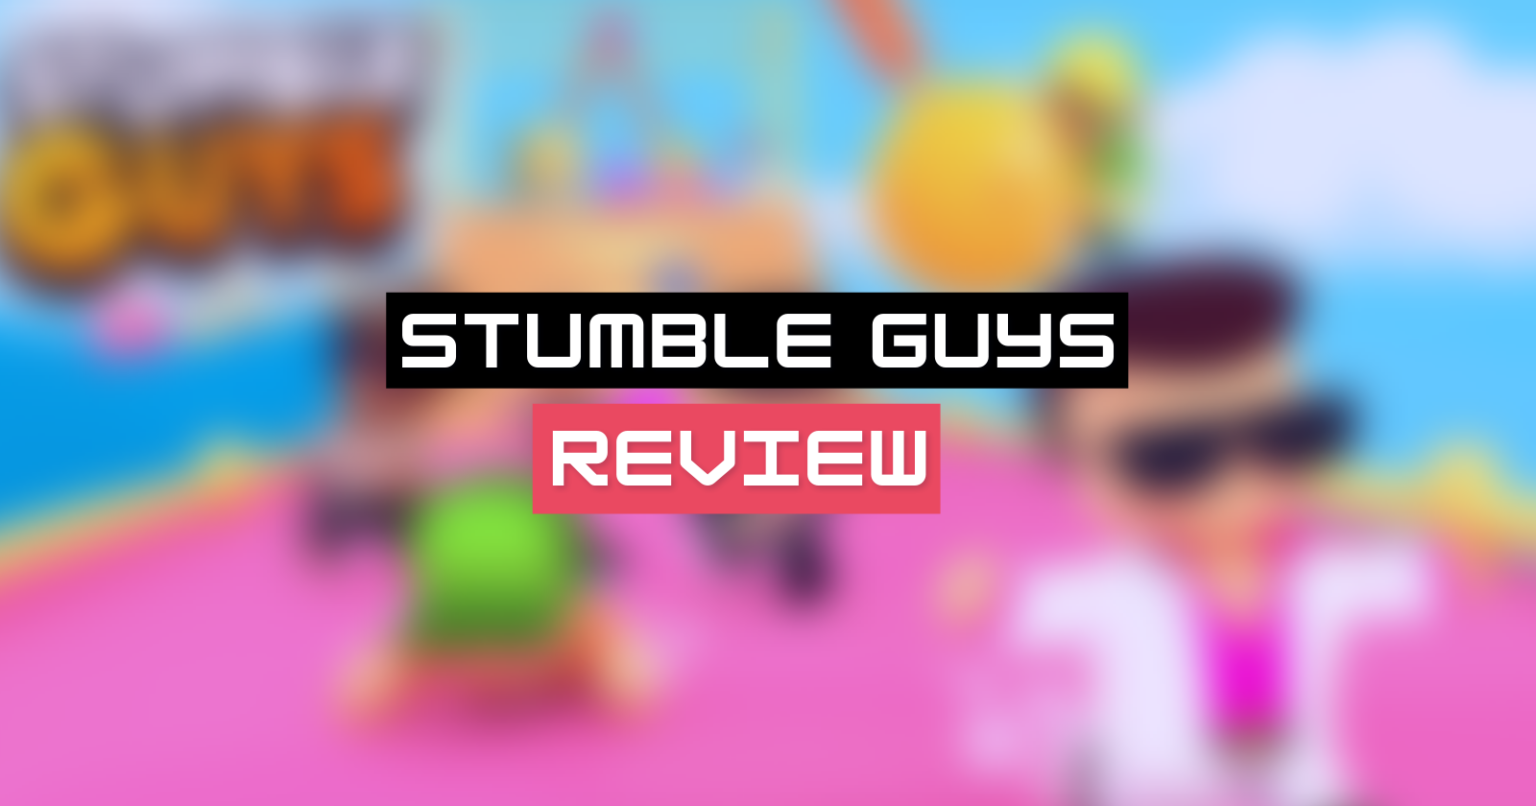 Stumble Fall Boys download the last version for android